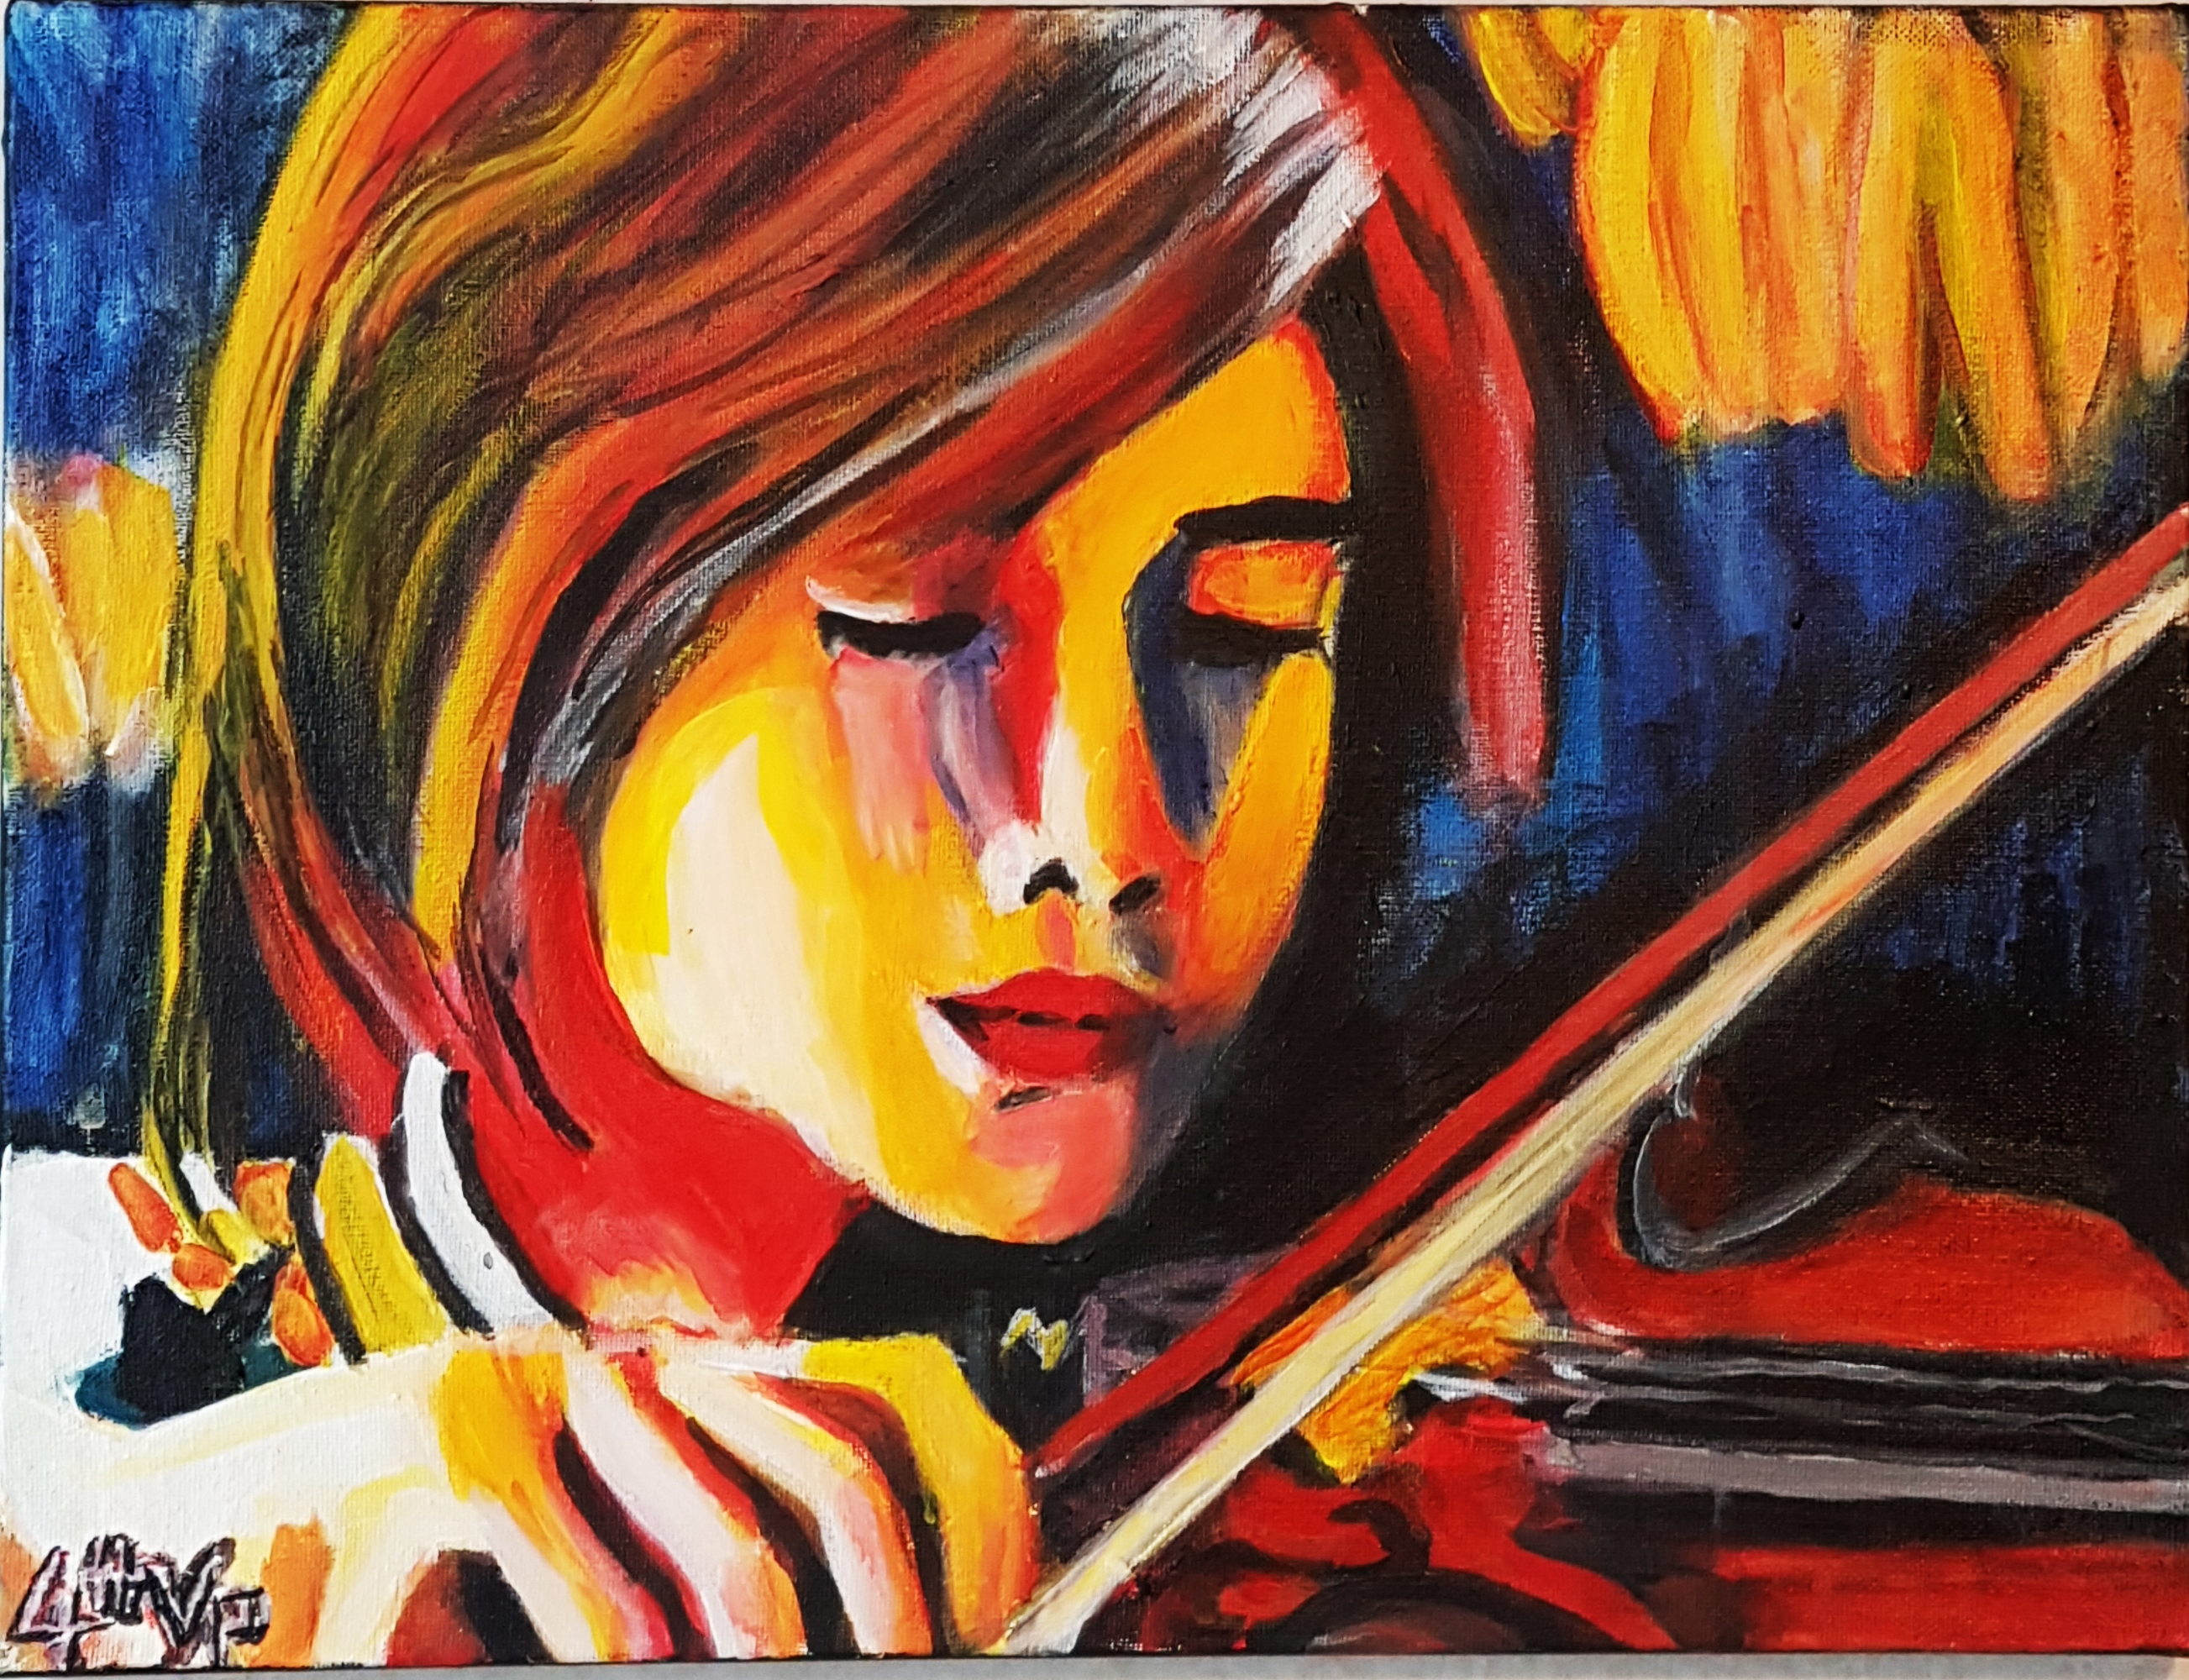 "Virginia Pahuru's "A Violin's Song", acrylic paint on canvas, depicts a woman with closed eyes playing a violin.